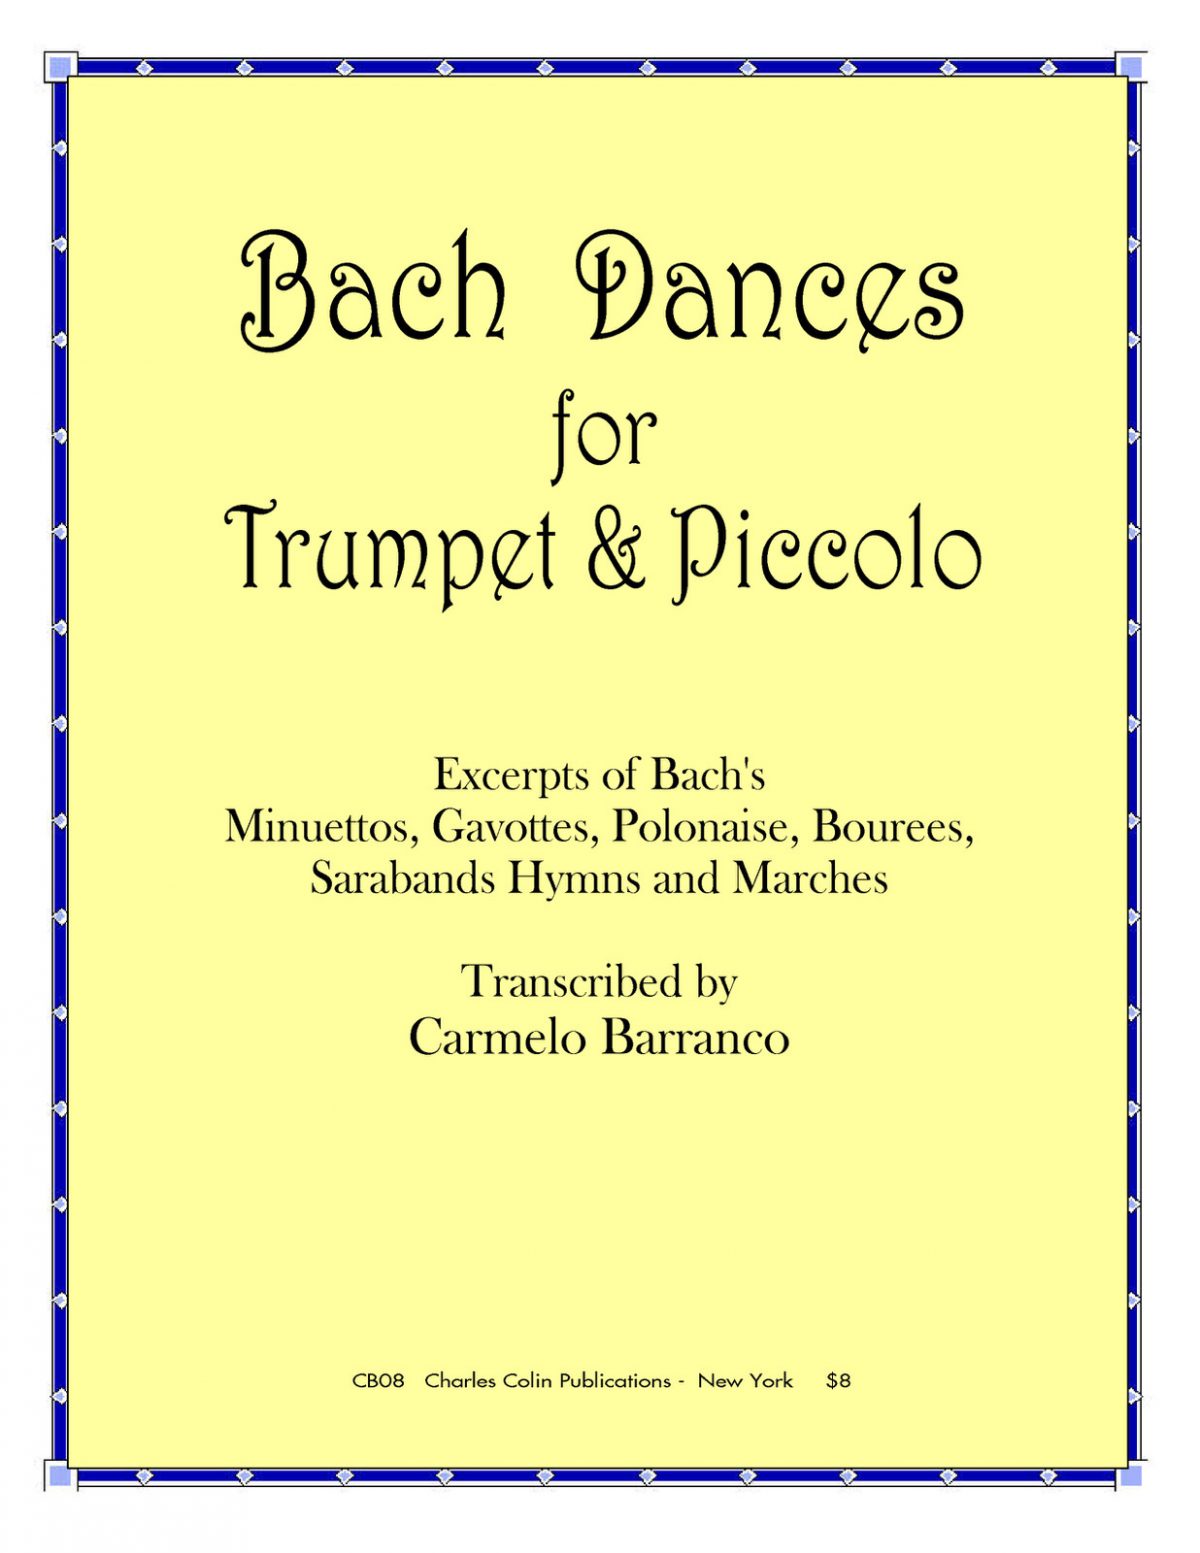 Piccolo Trumpet Anthology Collection